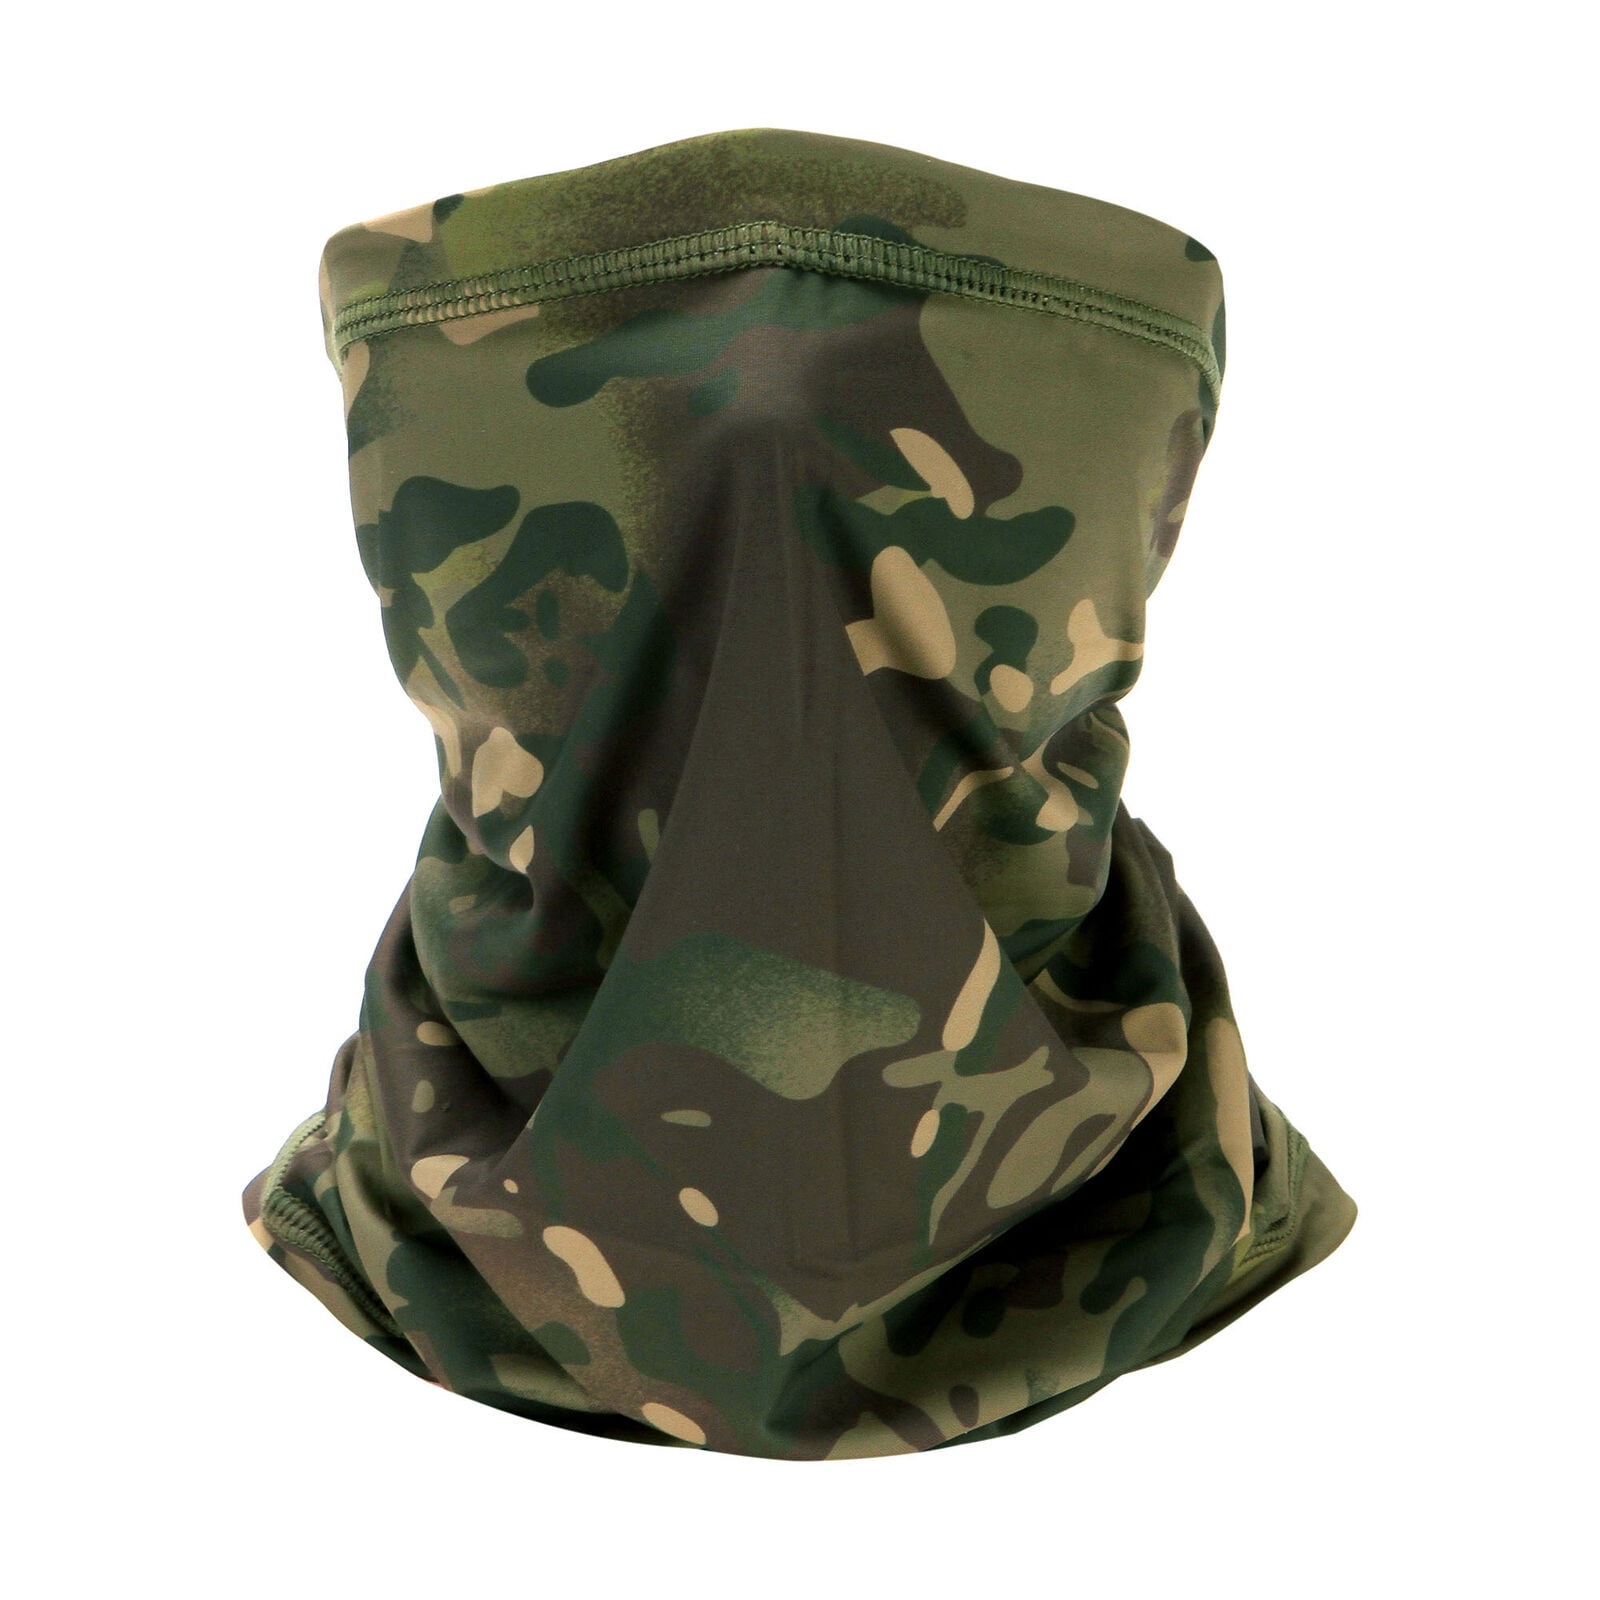 Cooling Neck Gaiter Tube Scarf Face Mask for Motorcycle Cycling Hunting Bandana 